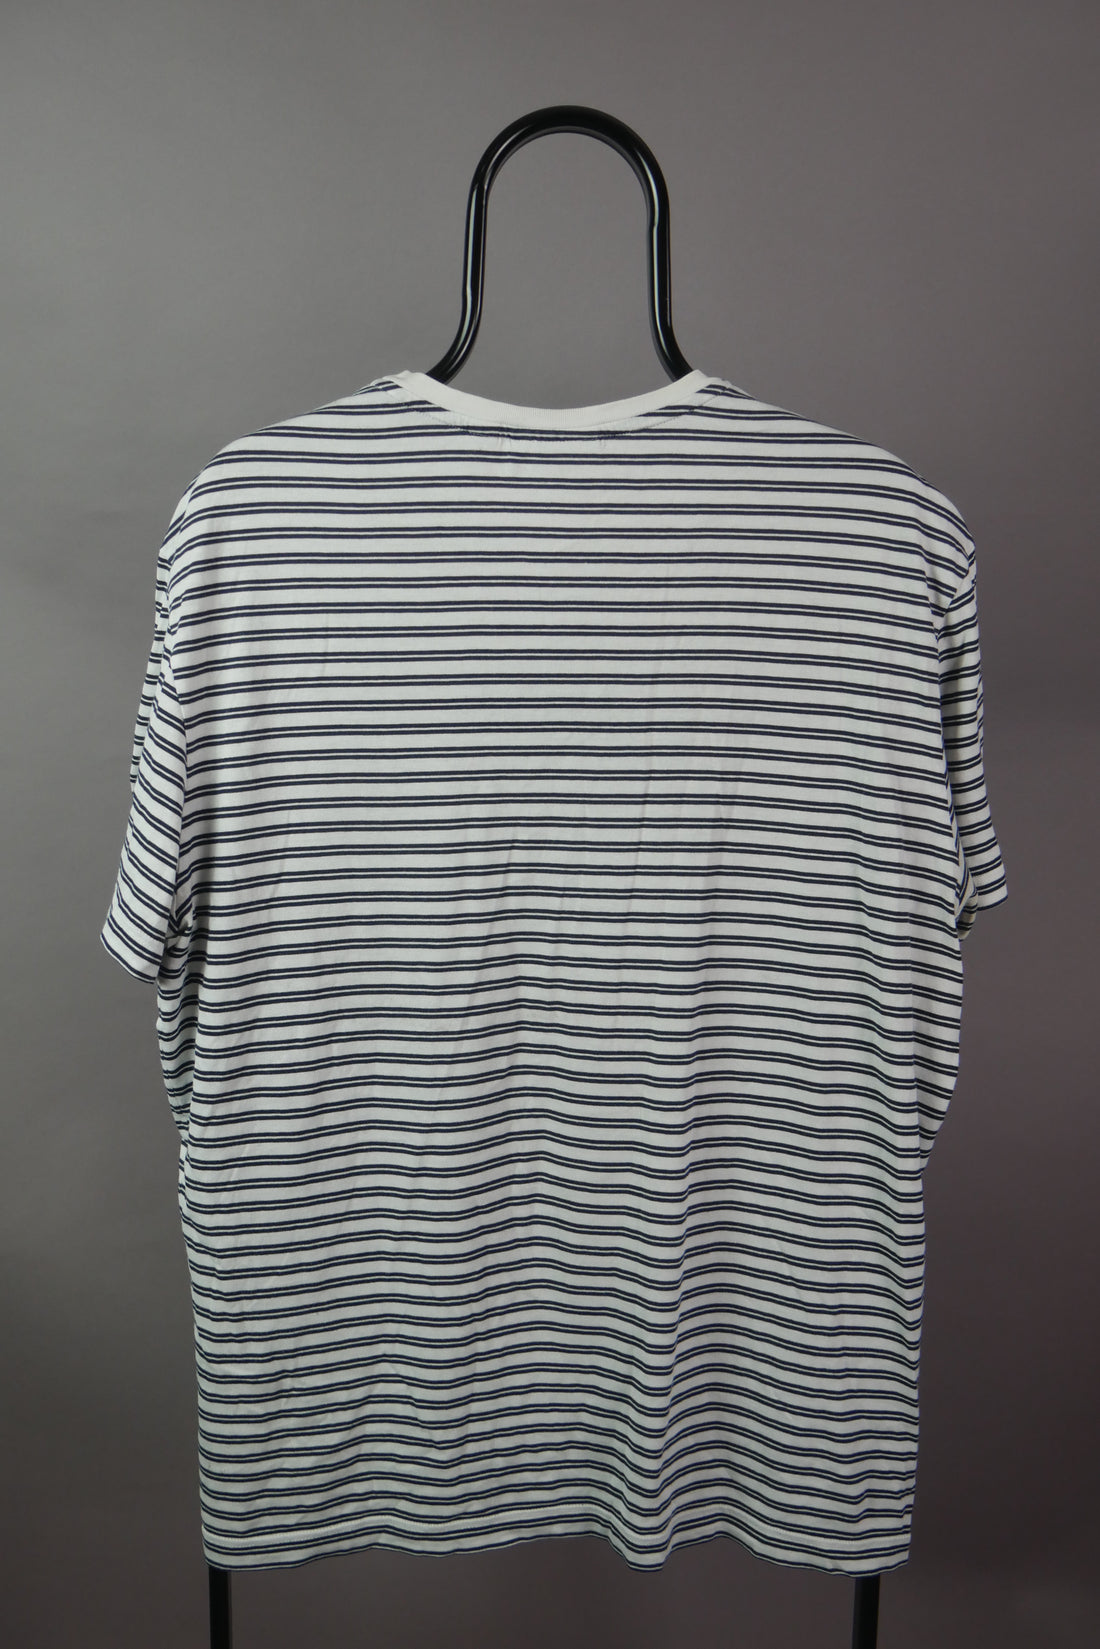 The Lacoste Striped T-Shirt (L)